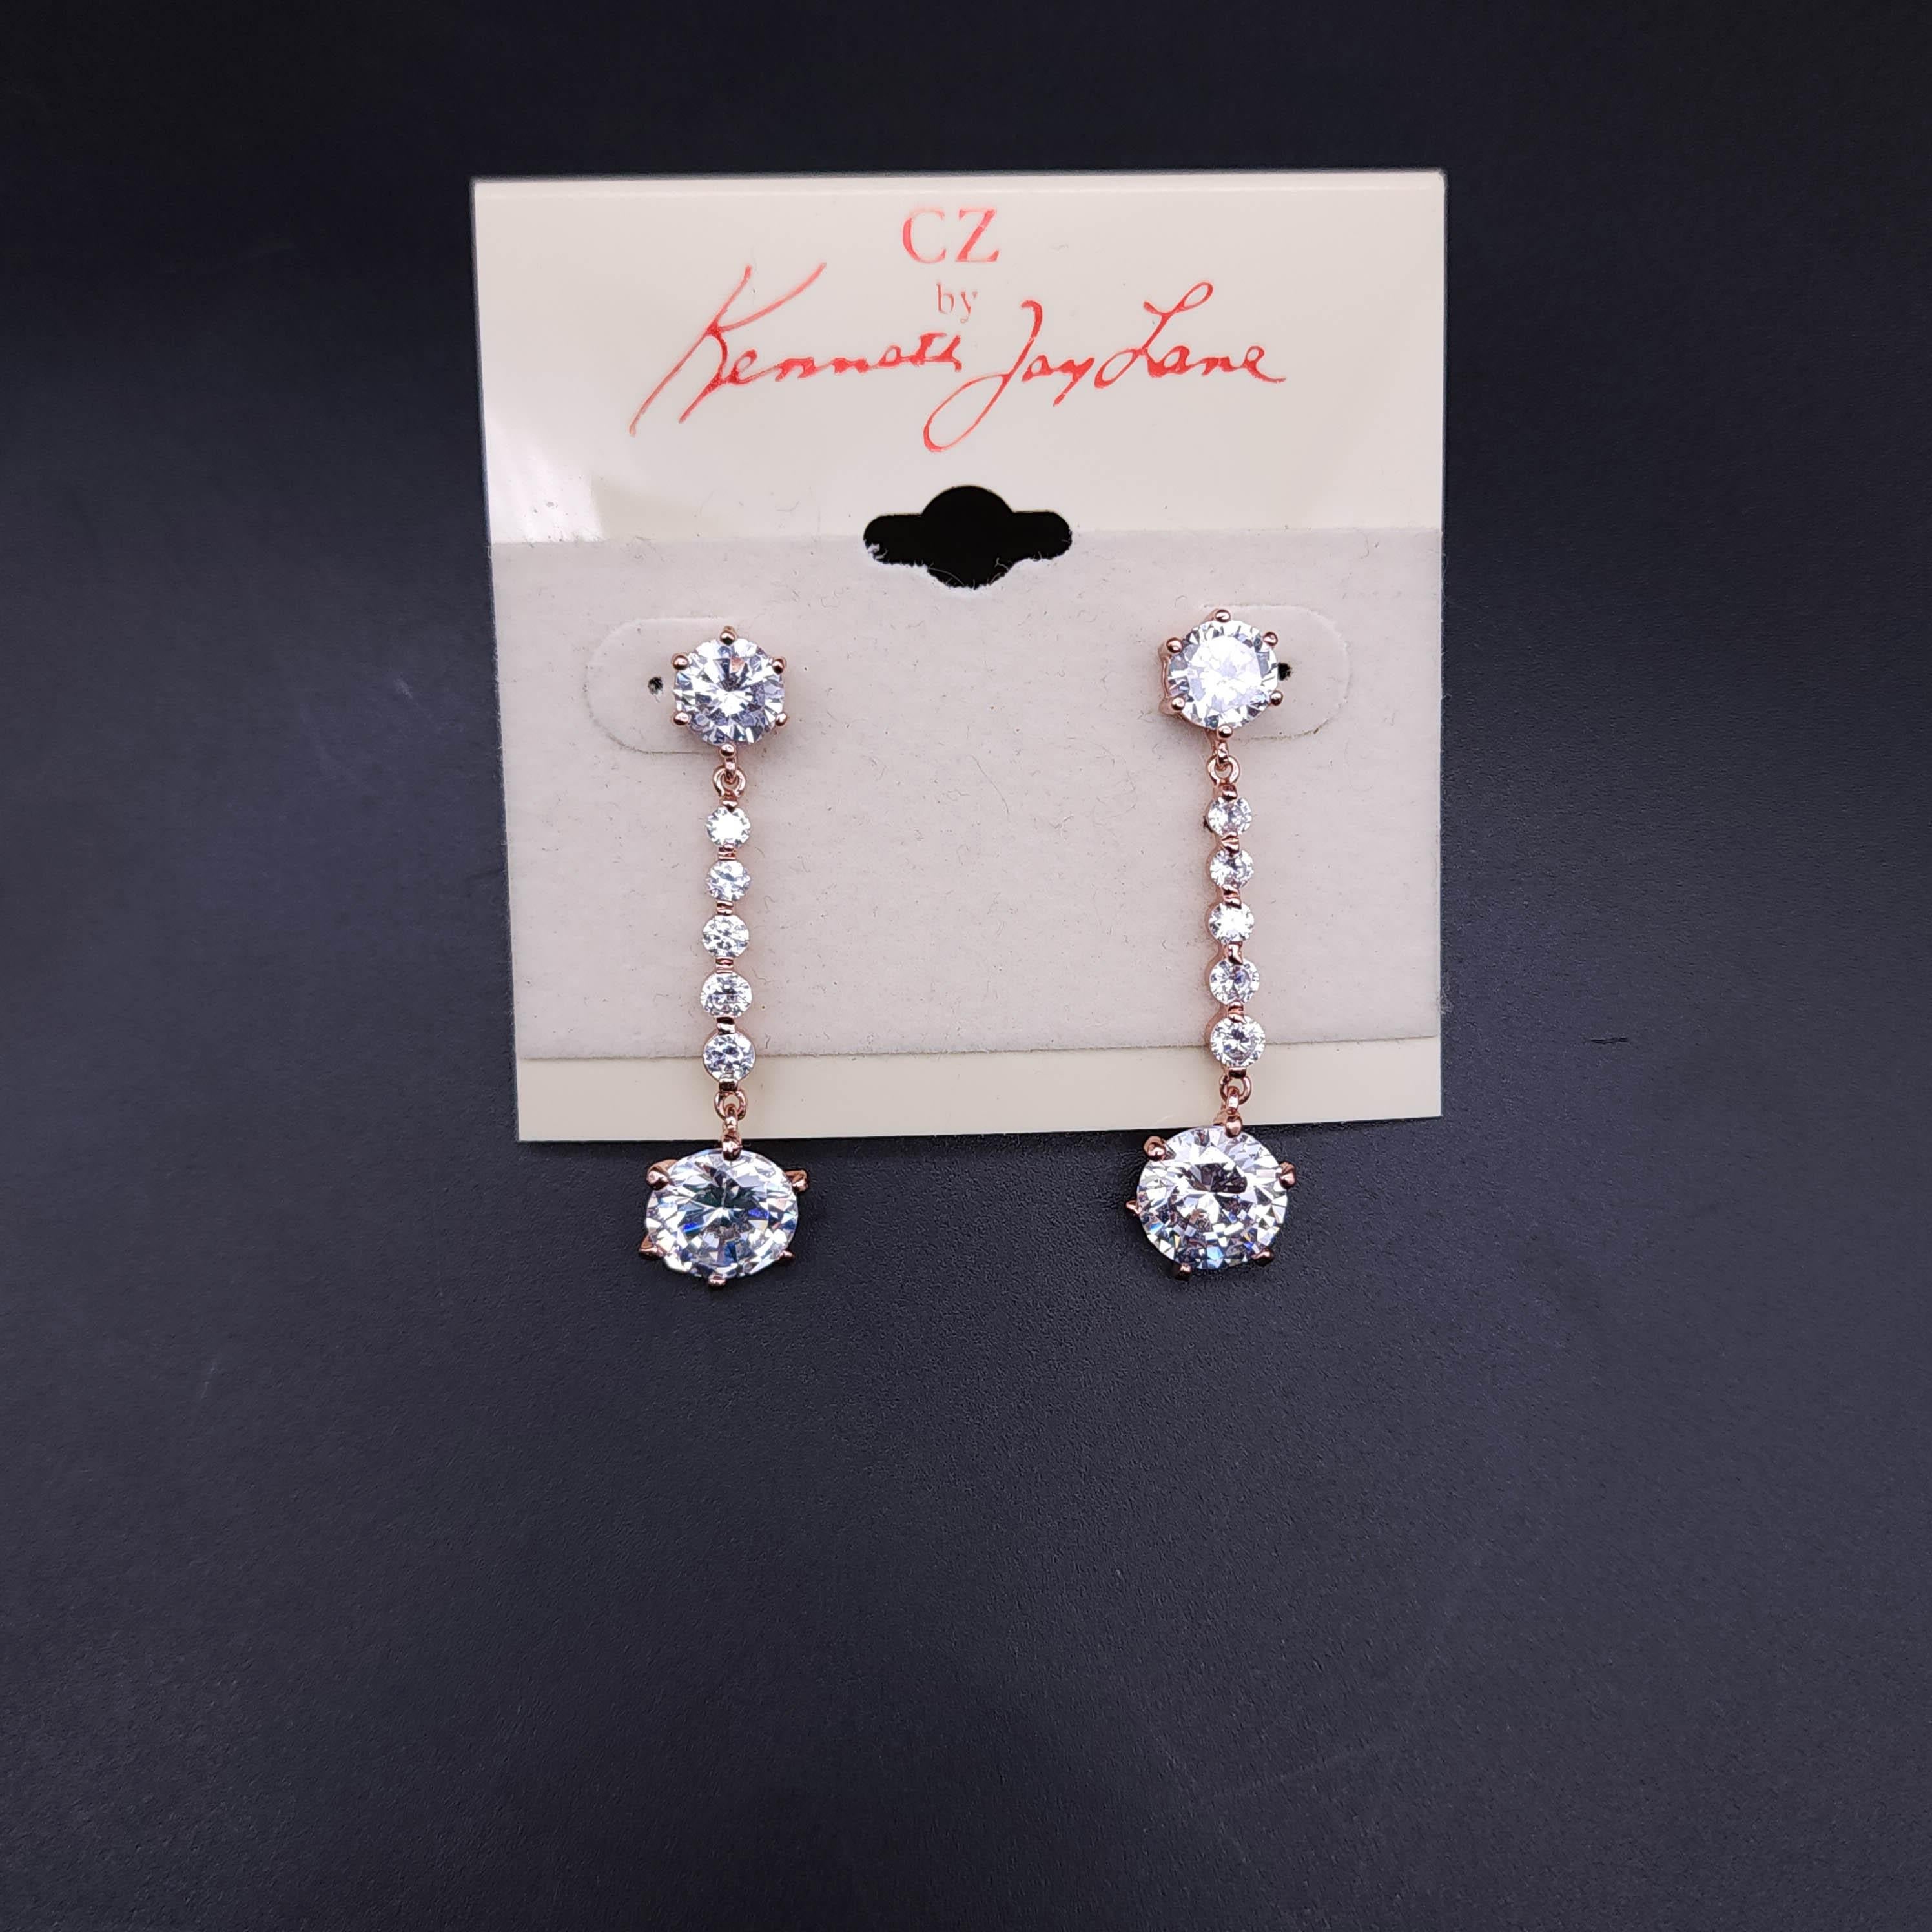 Illuminate your look with the CZ by Kenneth Jay Lane crystal dangle earrings. These stunning earrings feature prong-set cubic zirconia that glisten with a clear brilliance, complemented by the warm, blush hues of the rose gold tone. The dangle